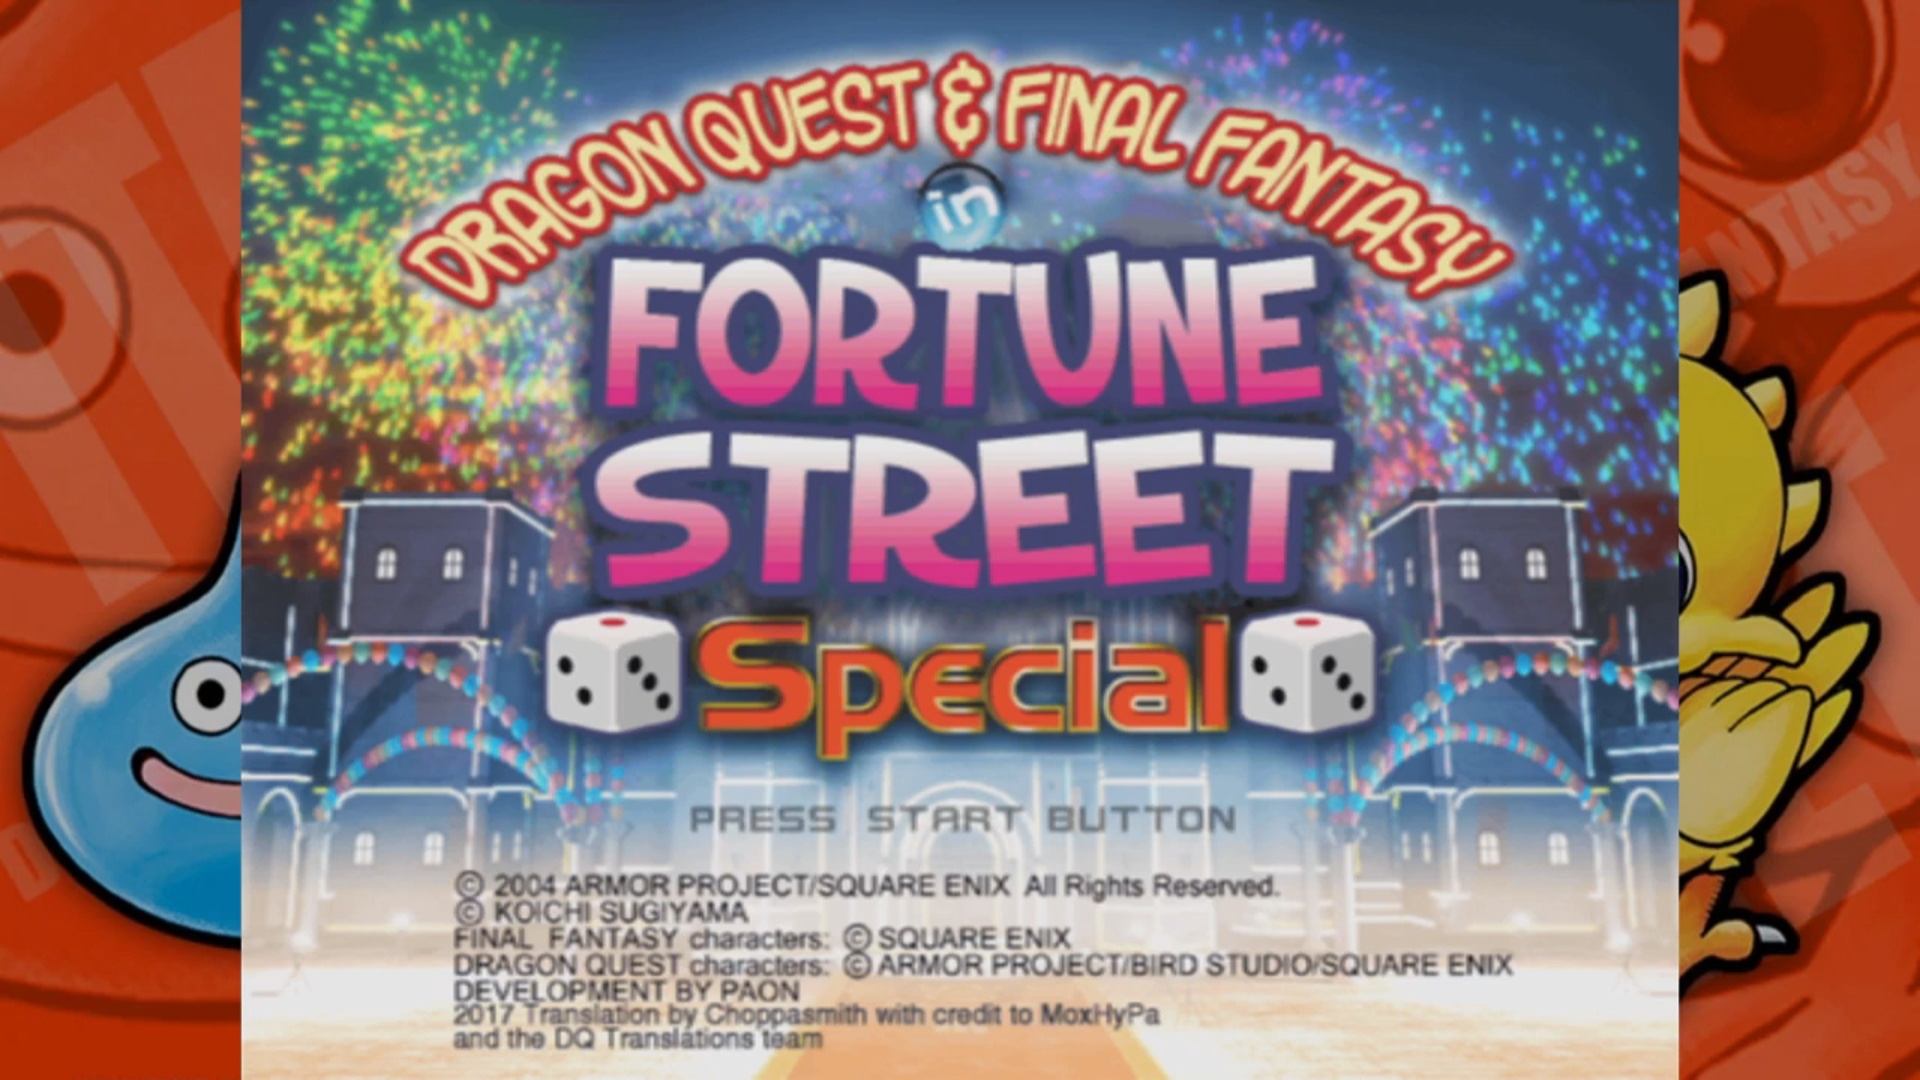 fortune street special thunder plains 5 finale  gotta bolt to the finish line